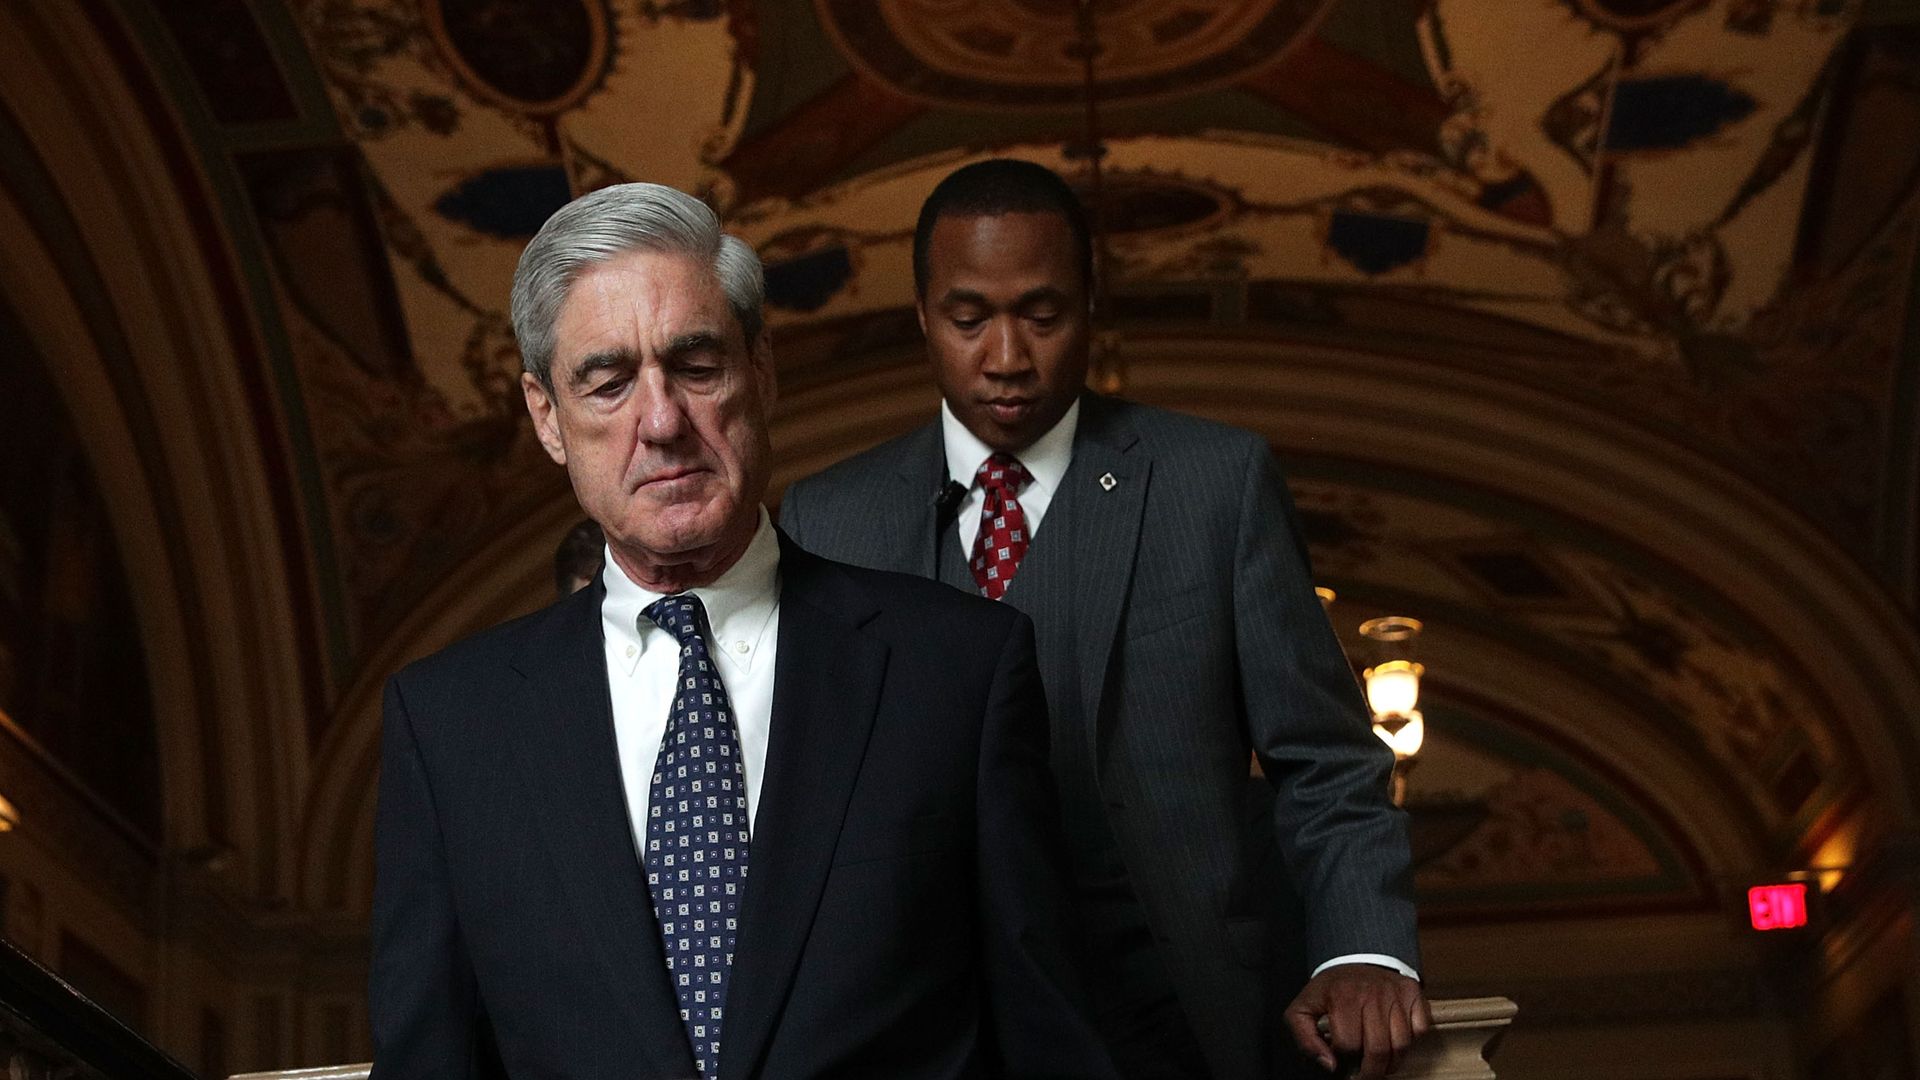 Robert Mueller walks down a flight of stairs in the Capitol